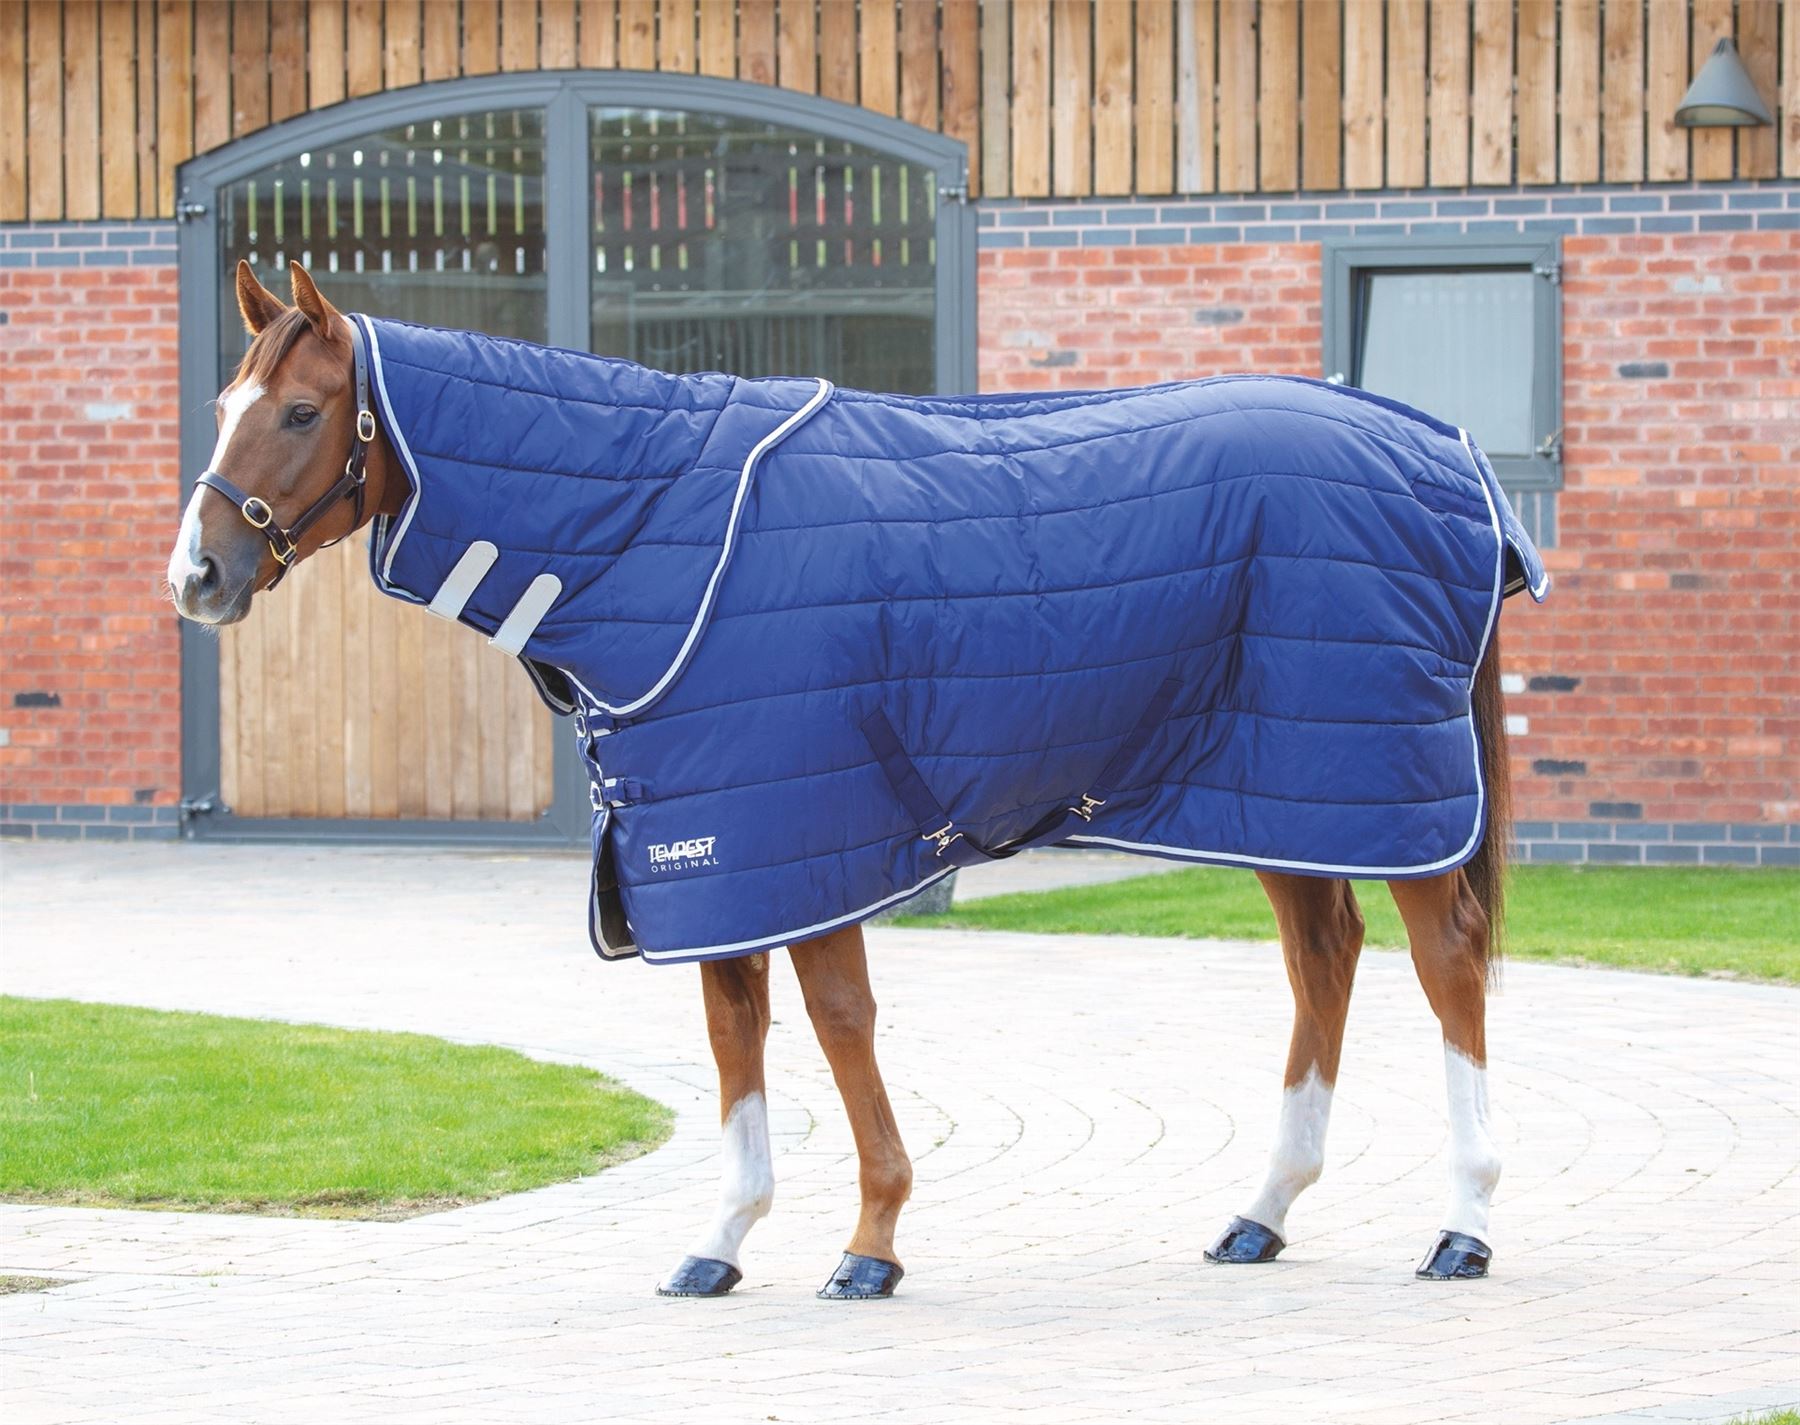 Shires Tempest Original 200 Stable Set - Just Horse Riders